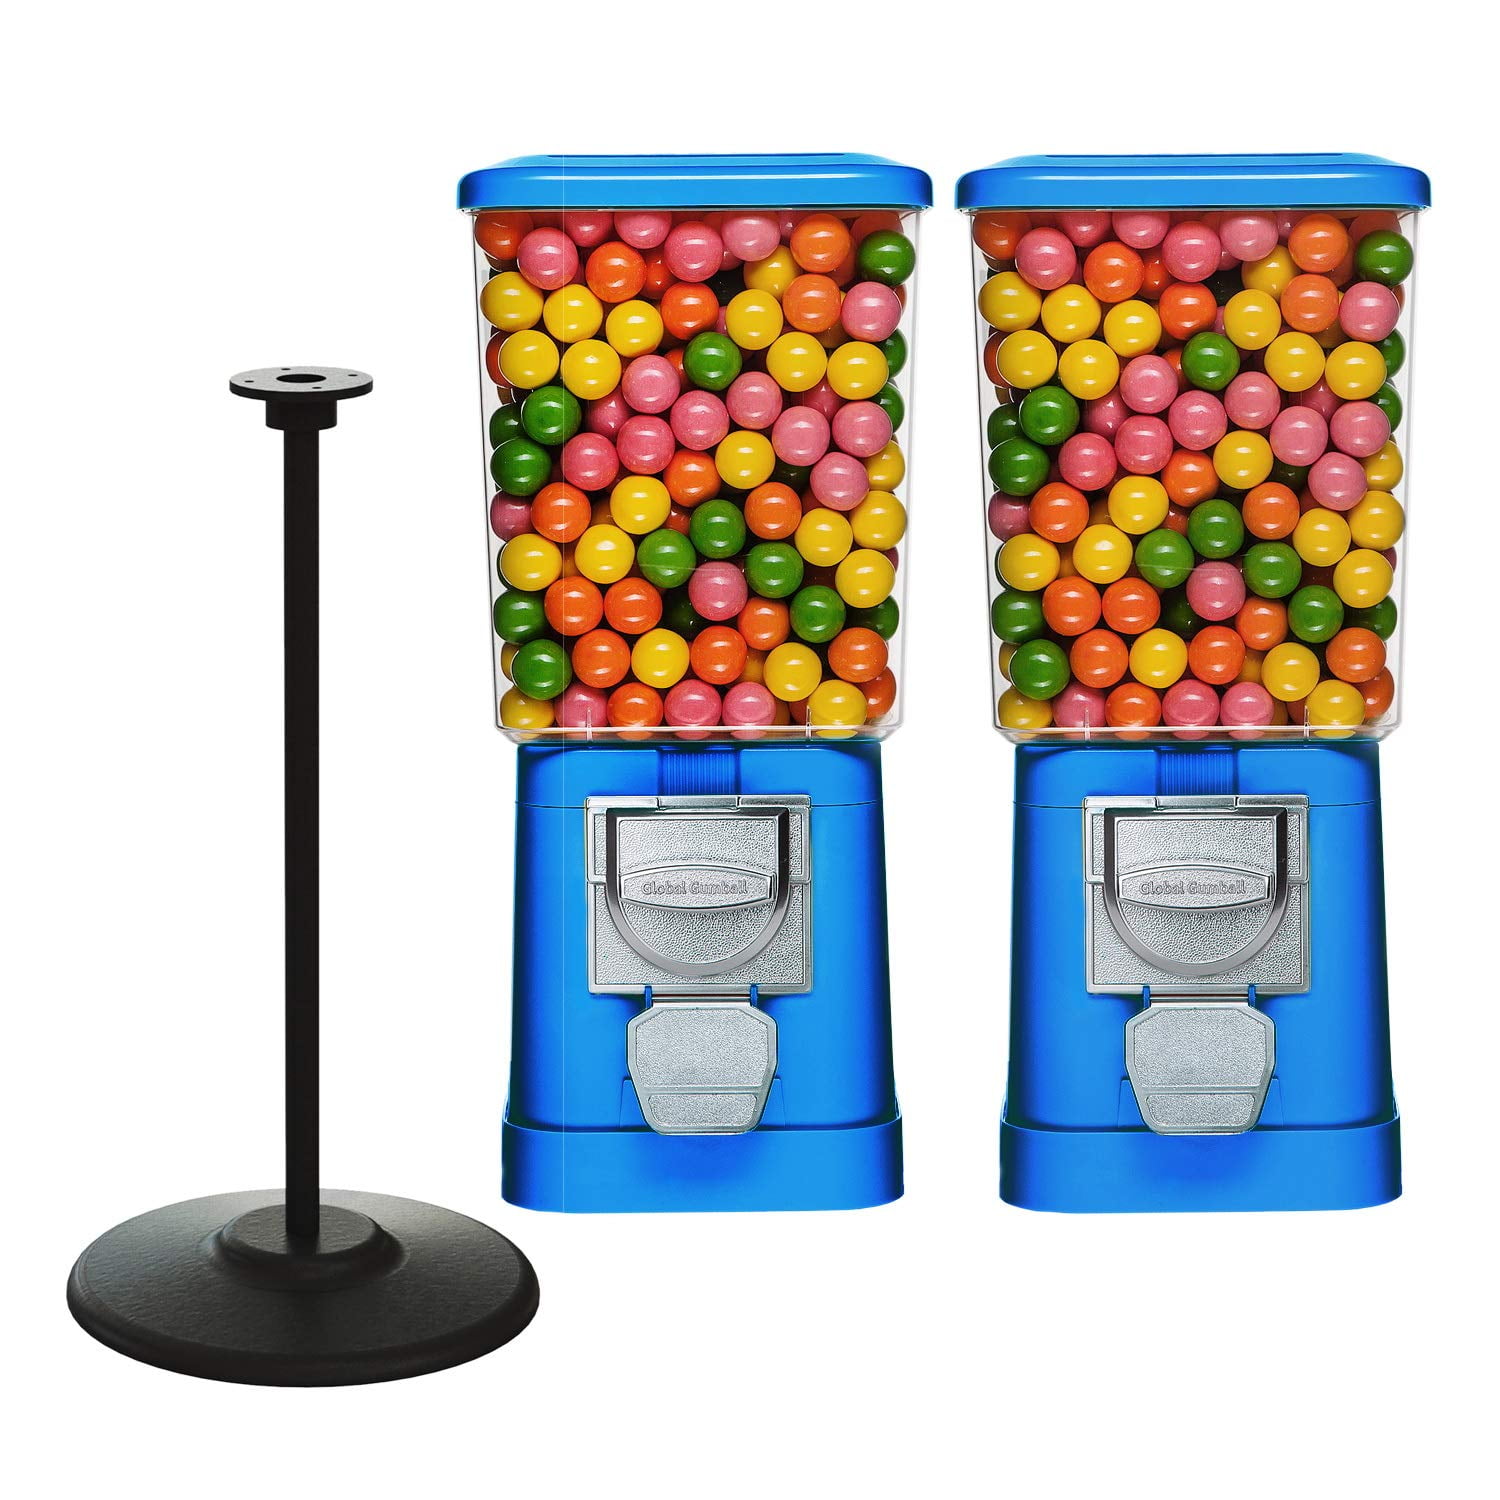 IRONWALLS Black Candy Gumball Vending Machine Canister Capsule Vending Dispenser Double Head T Stand